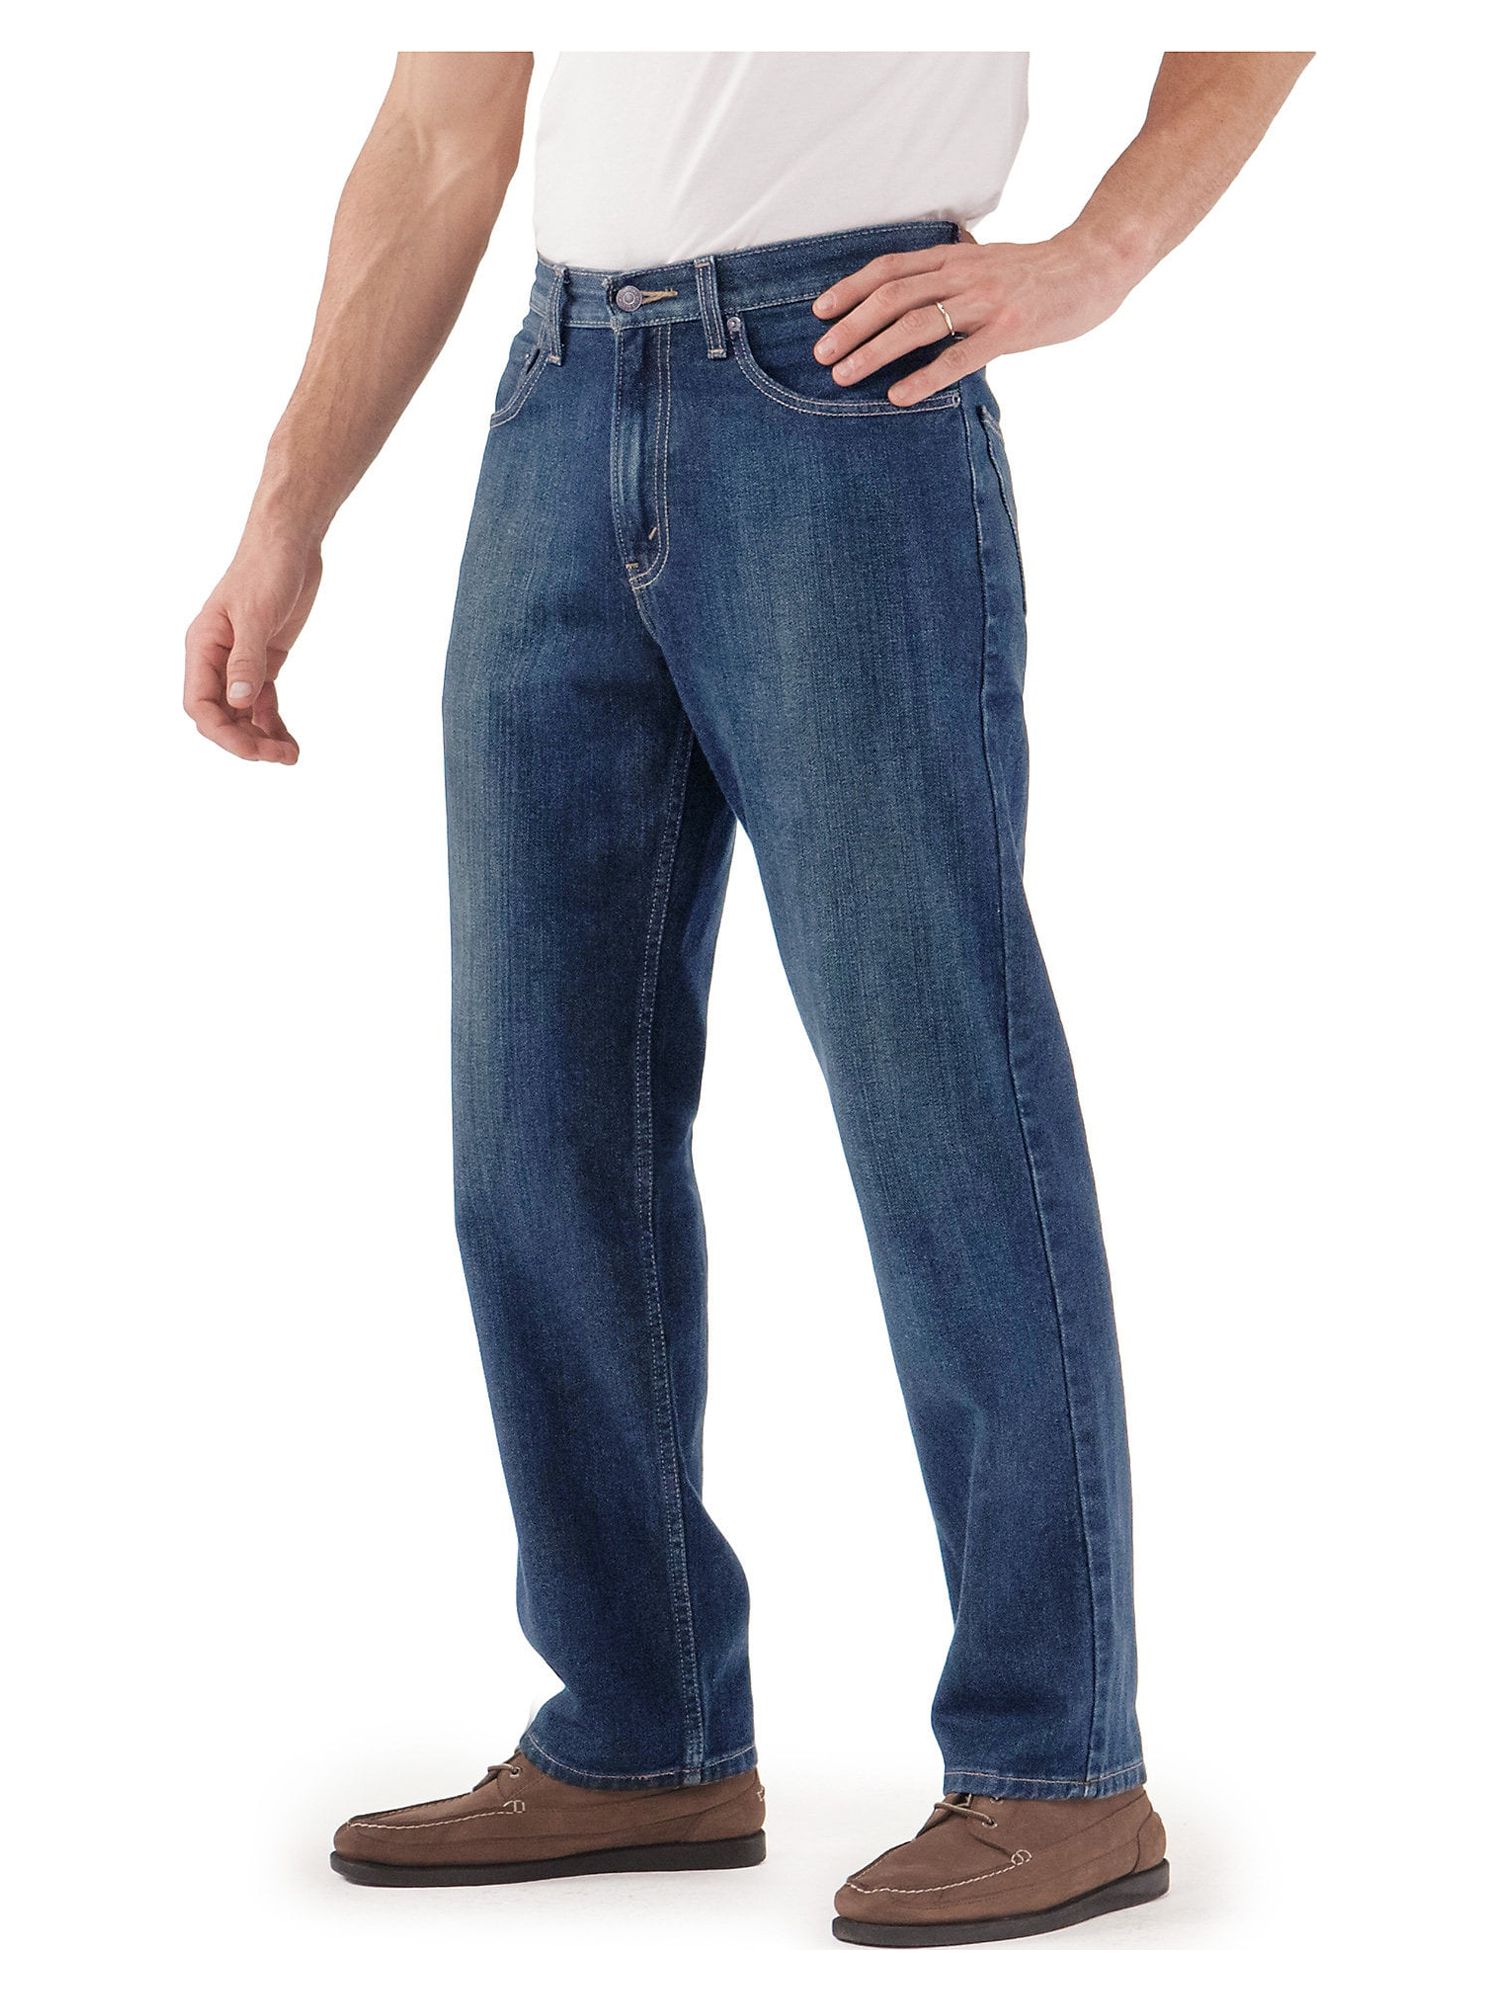 Signature by Levi Strauss & Co. Men's and Big and Tall Relaxed Fit Jeans - image 1 of 8